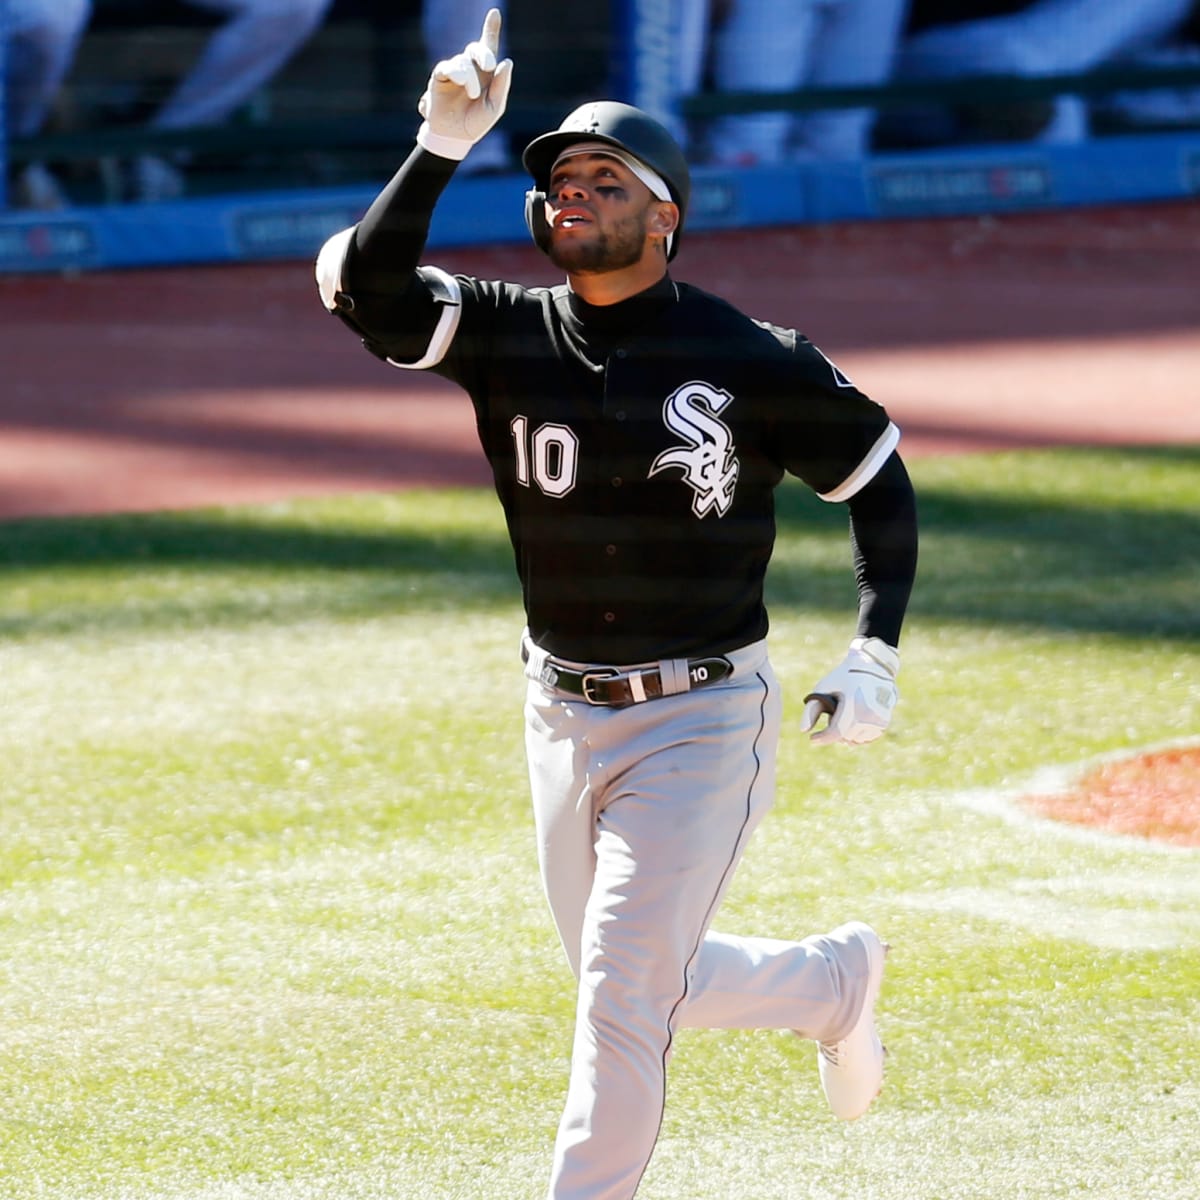 Yoan Moncada likes the No. 2 spot in White Sox' lineup - Chicago Sun-Times